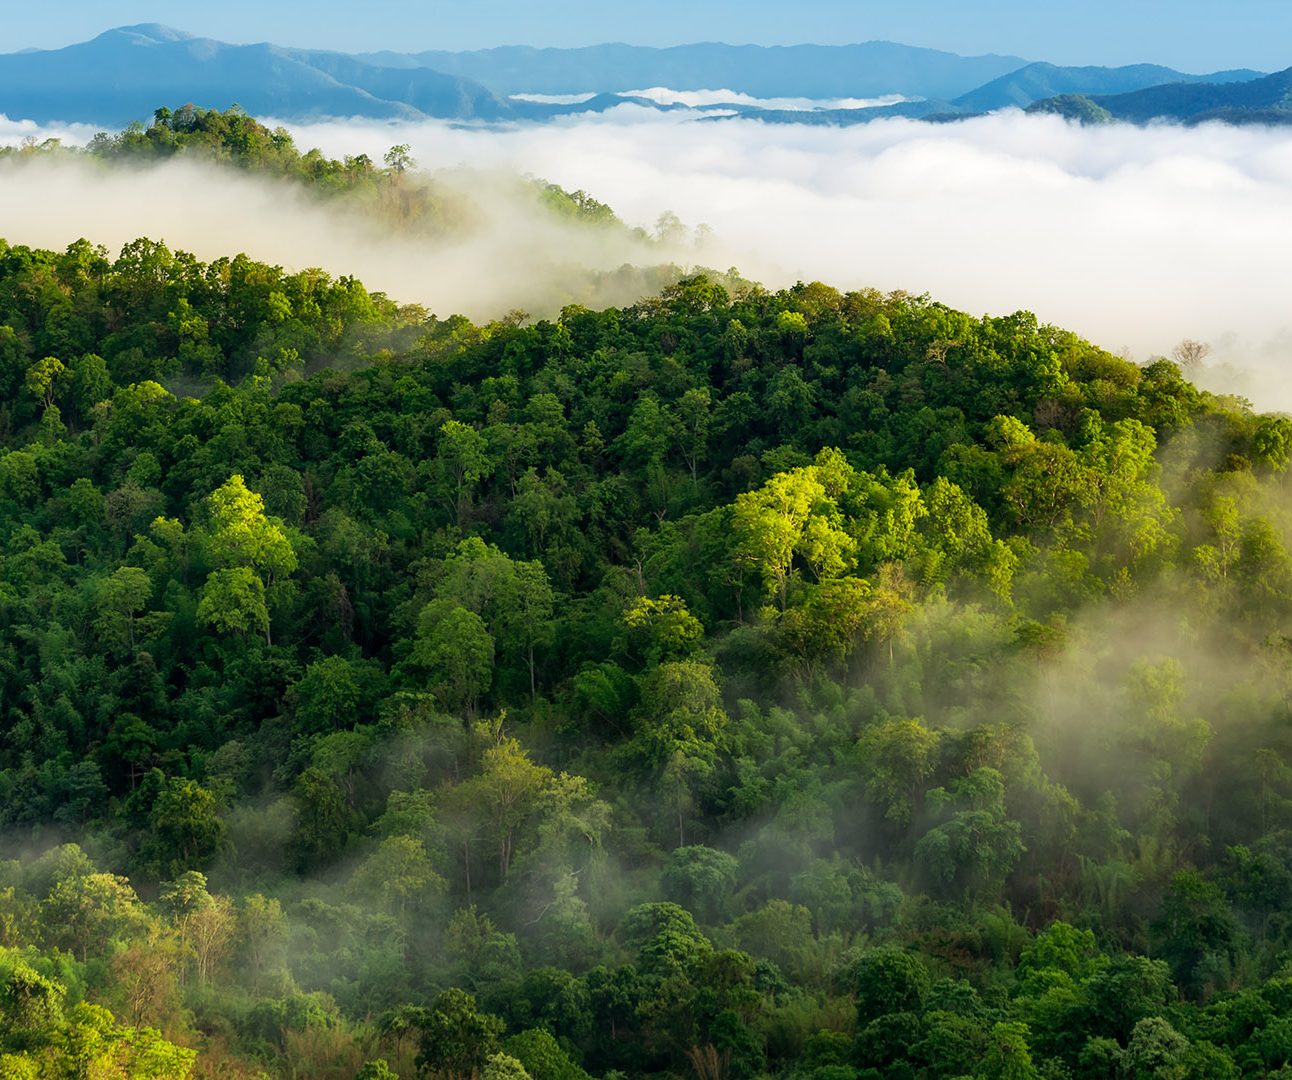 Beautiful mist over green forest on mountain, Aerial view sunrise over the mountain range at the north of thailand, Beauty rainforest landscape with fog in morning.